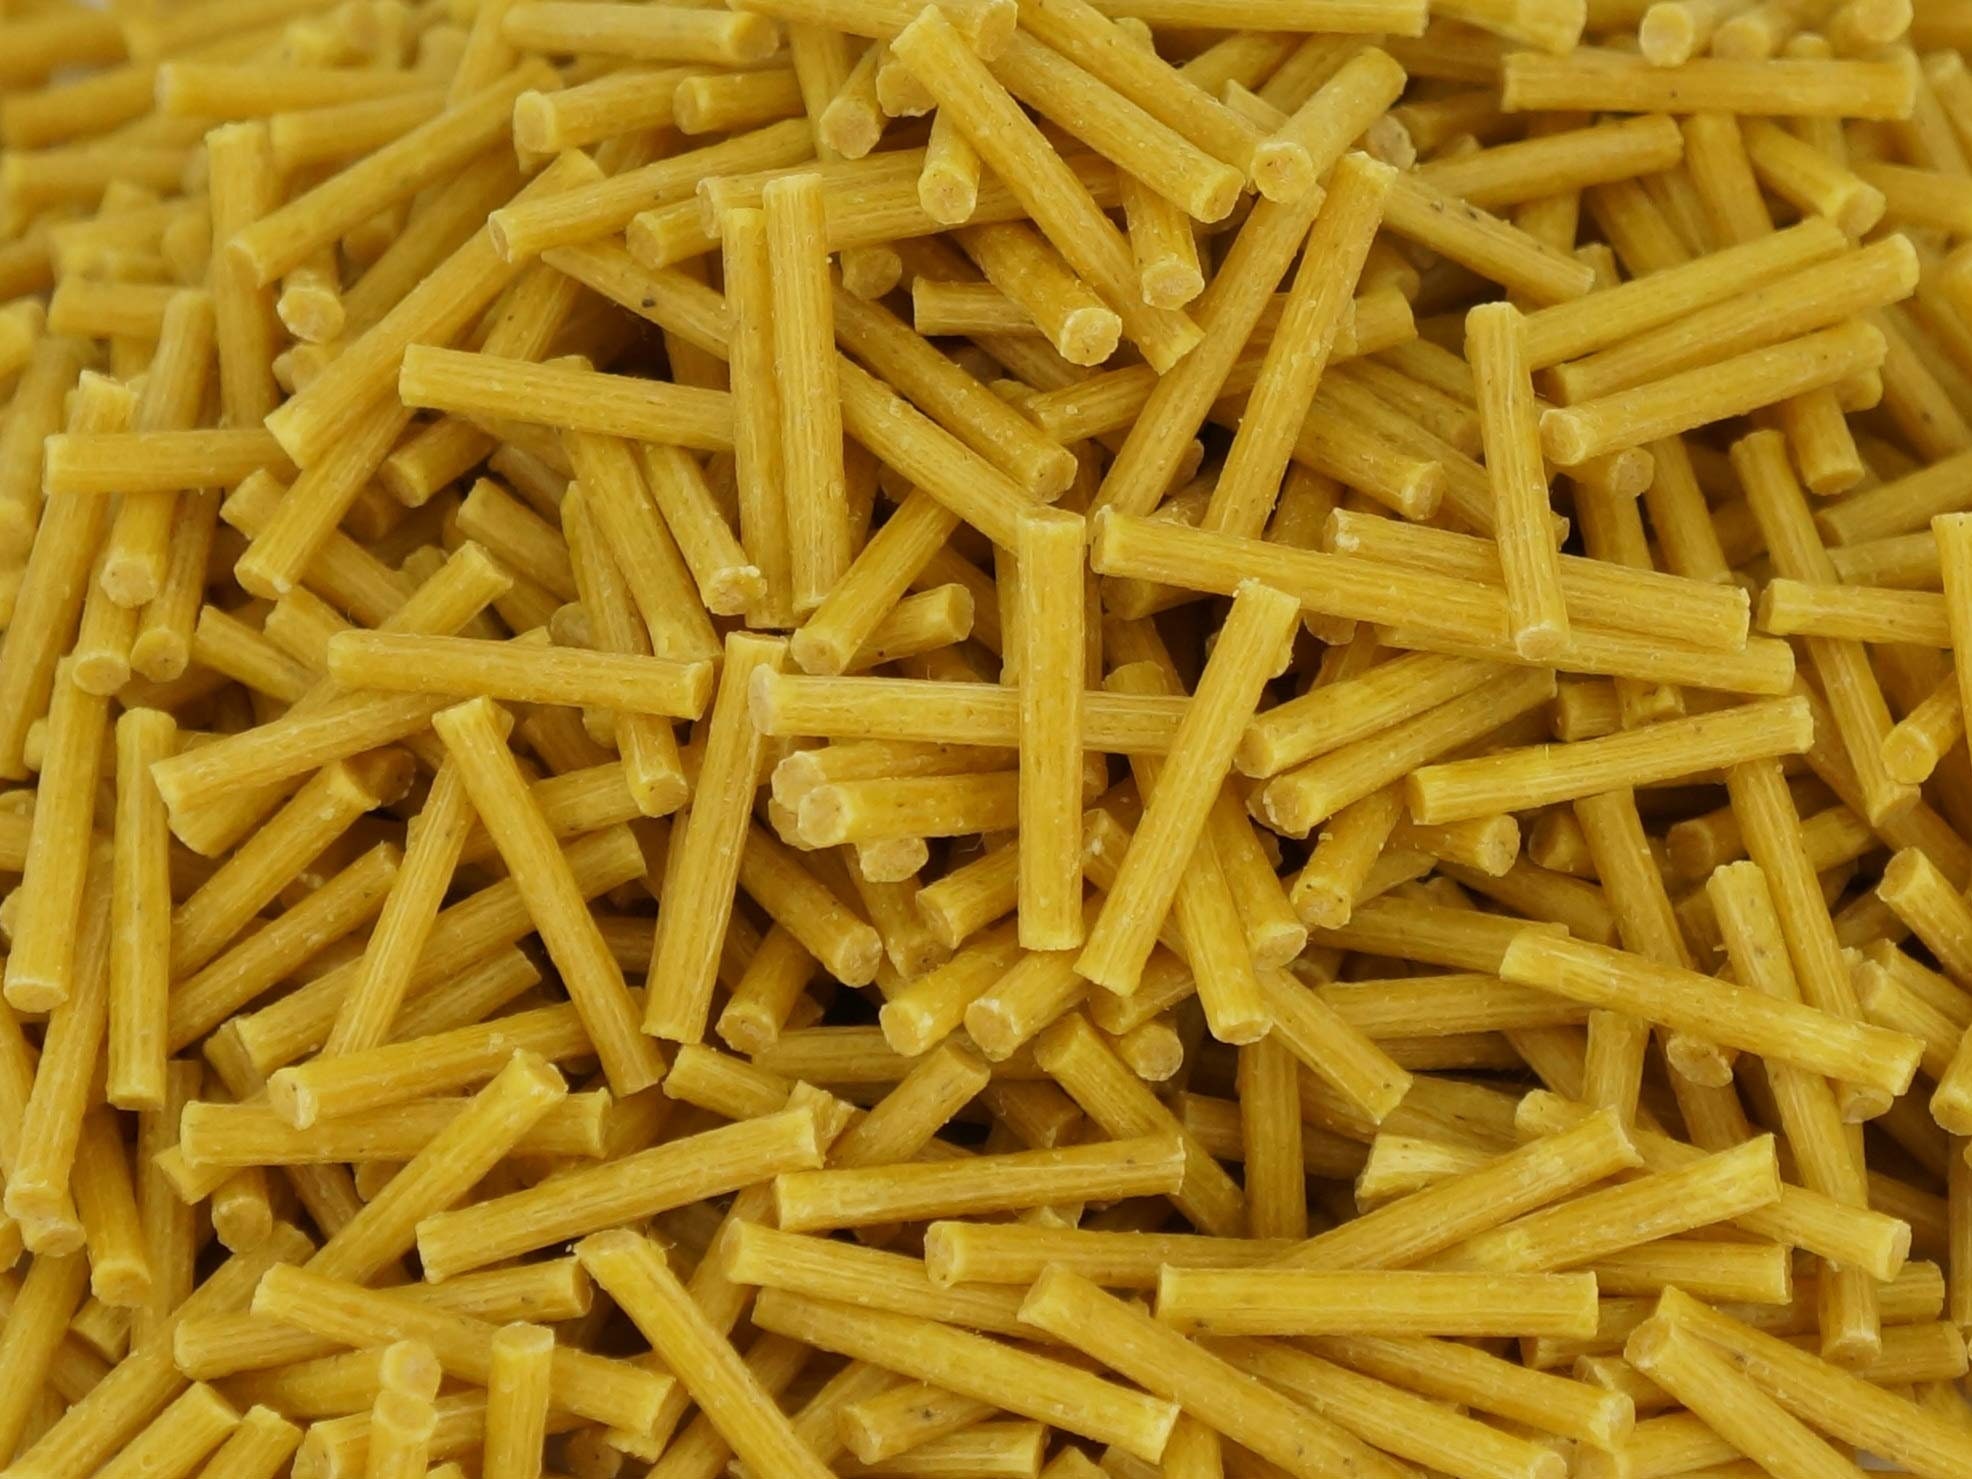 Beeswax Candle Wicks for Orthodox Vigil Oil Lamps, Floating